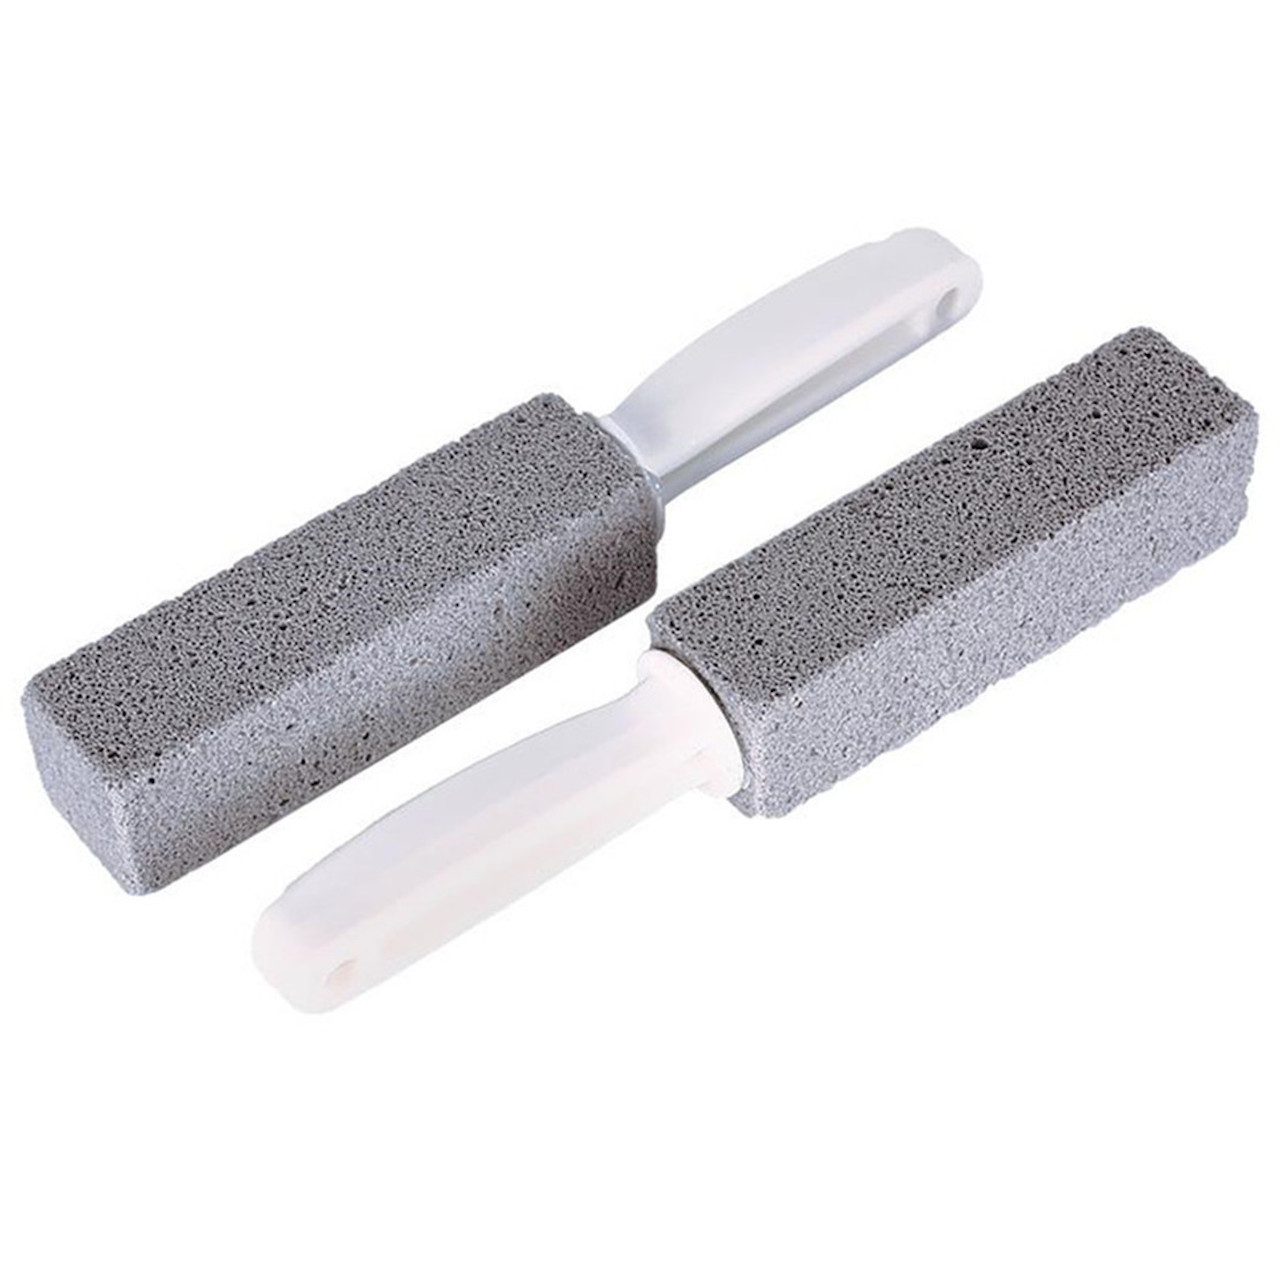 How To Store Toilet Pumice Stone